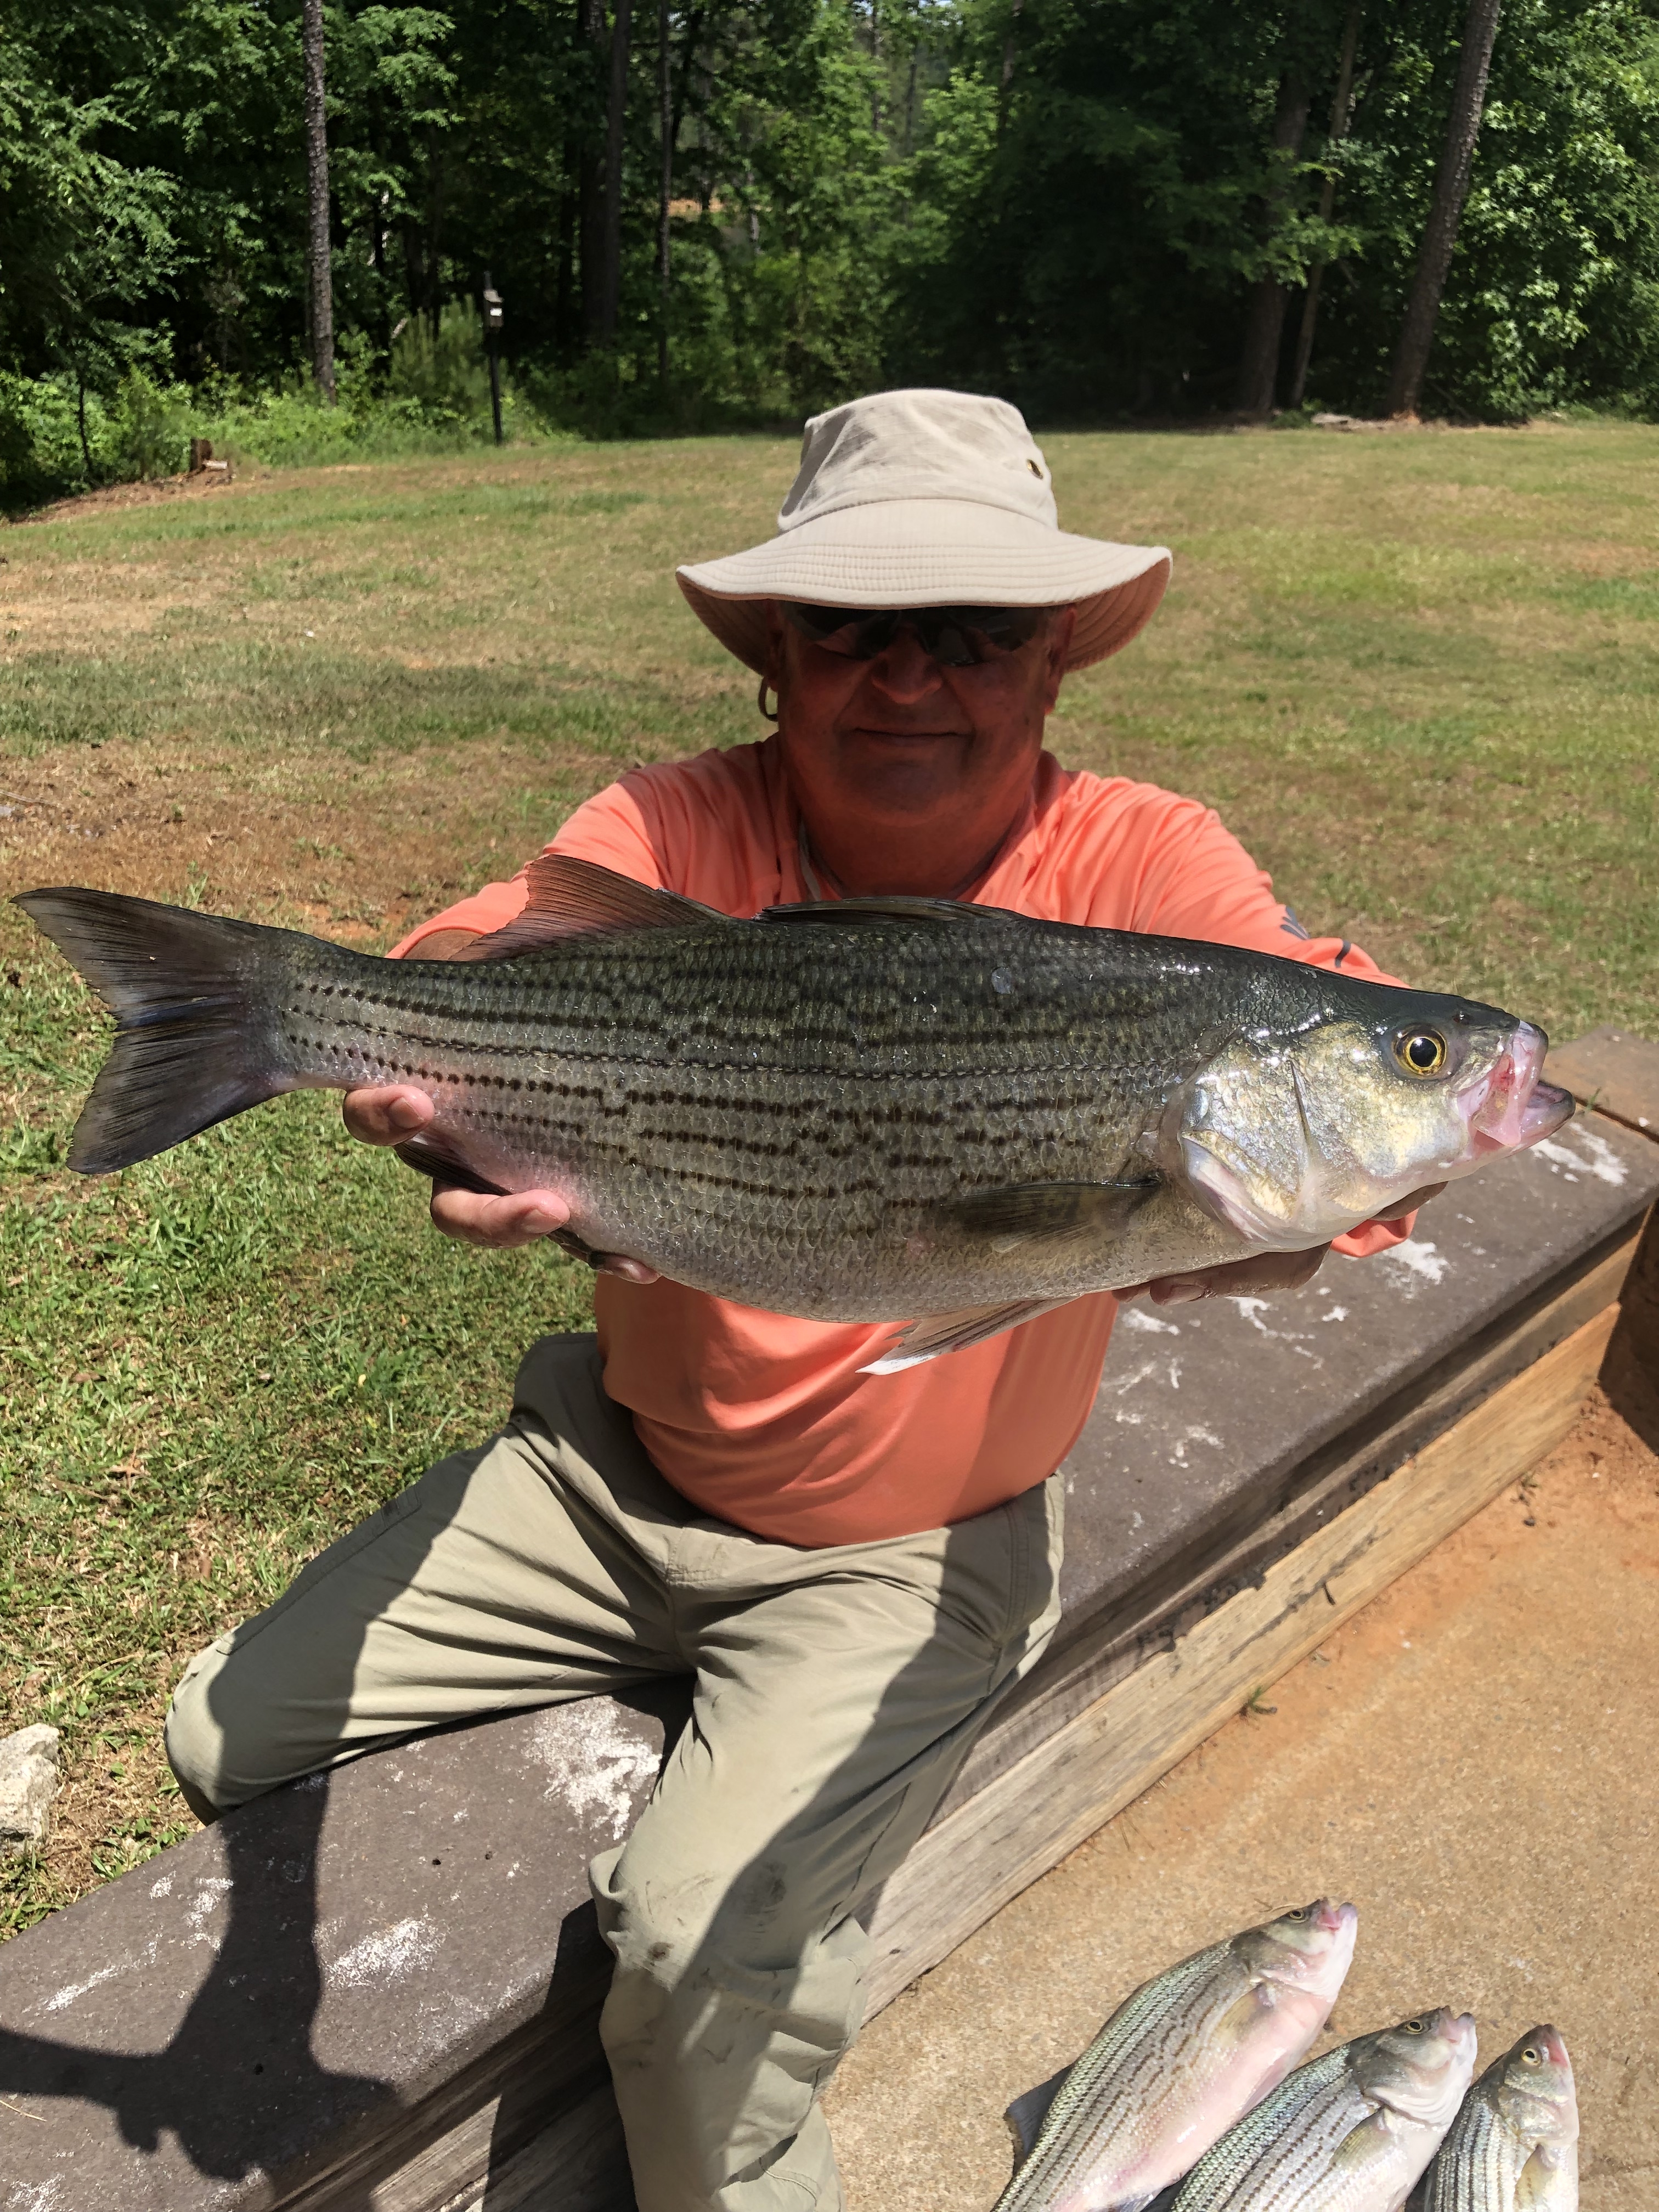 May-4-2019-Ricky-cleghorn-with-his-big-fish-of-the-day.